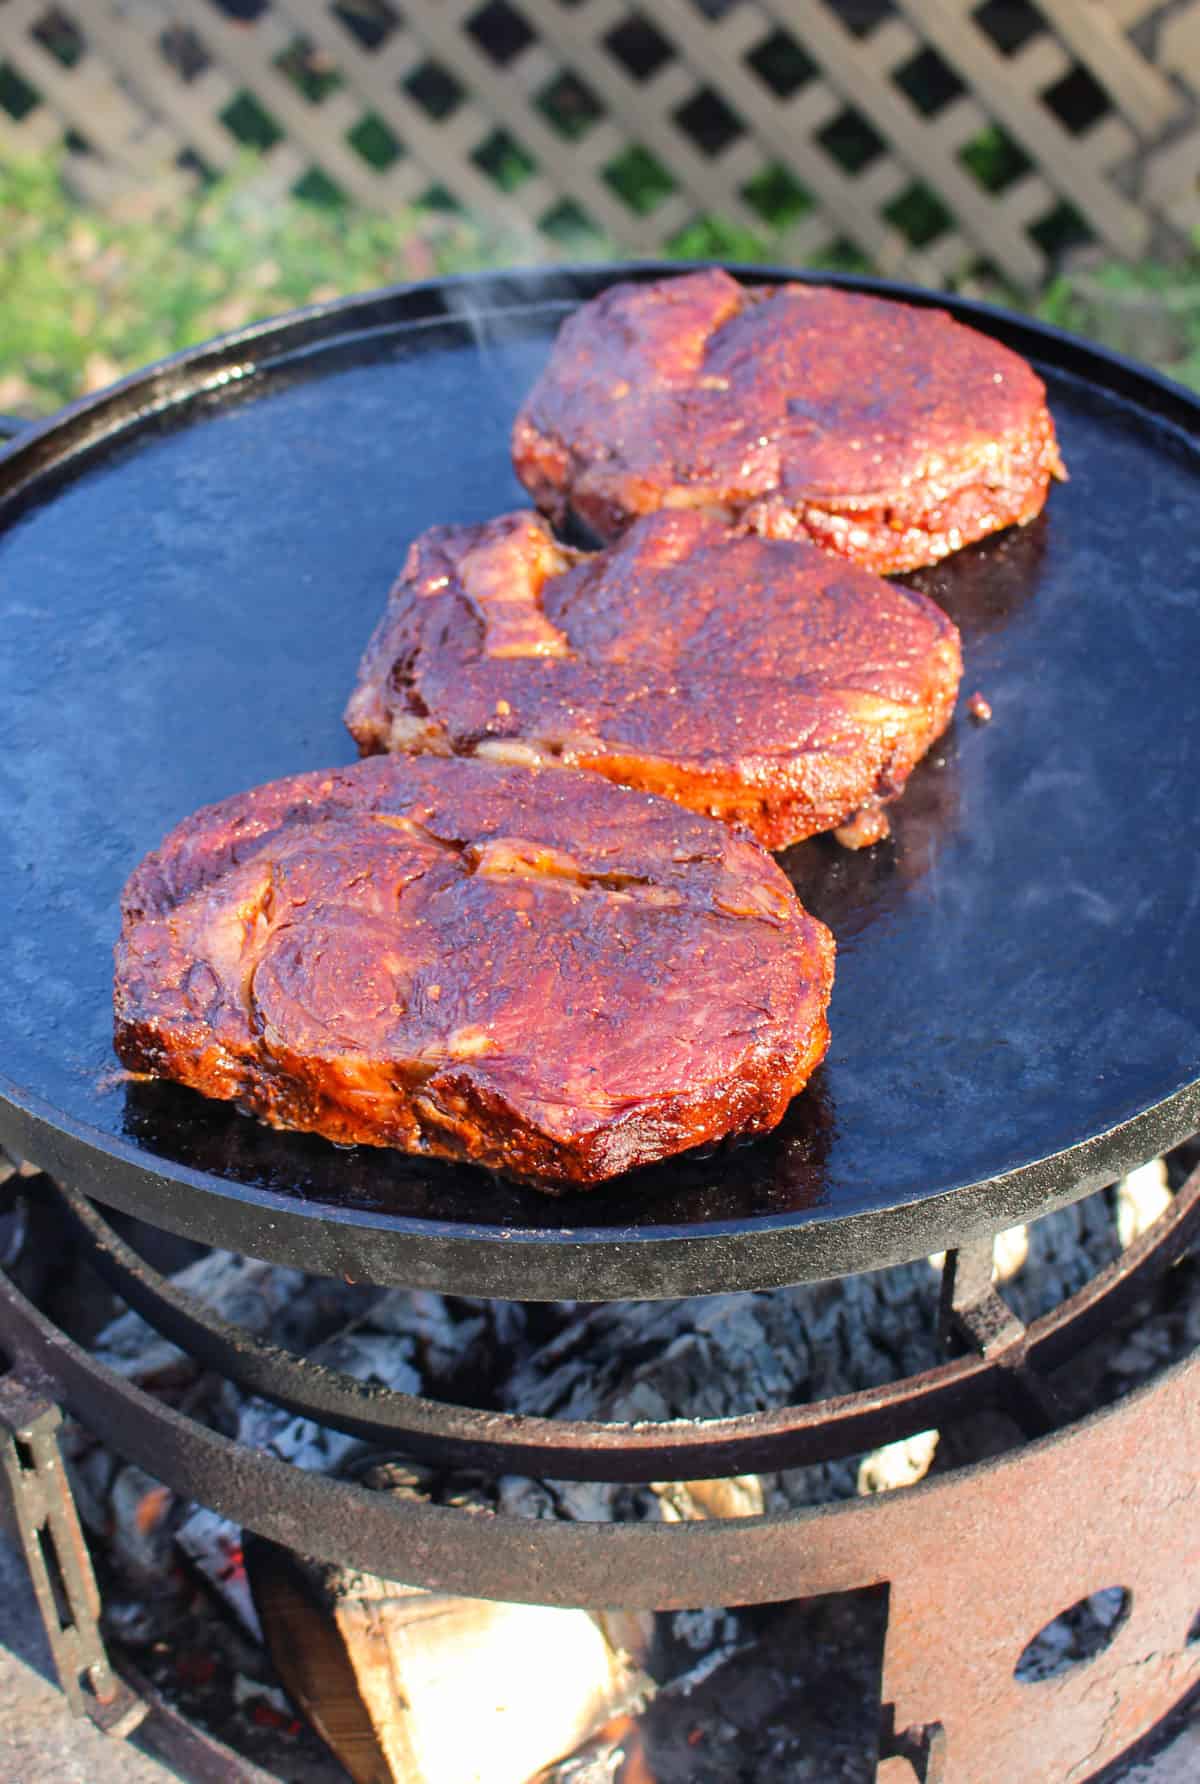 Searing the Ribeyes over the fire.